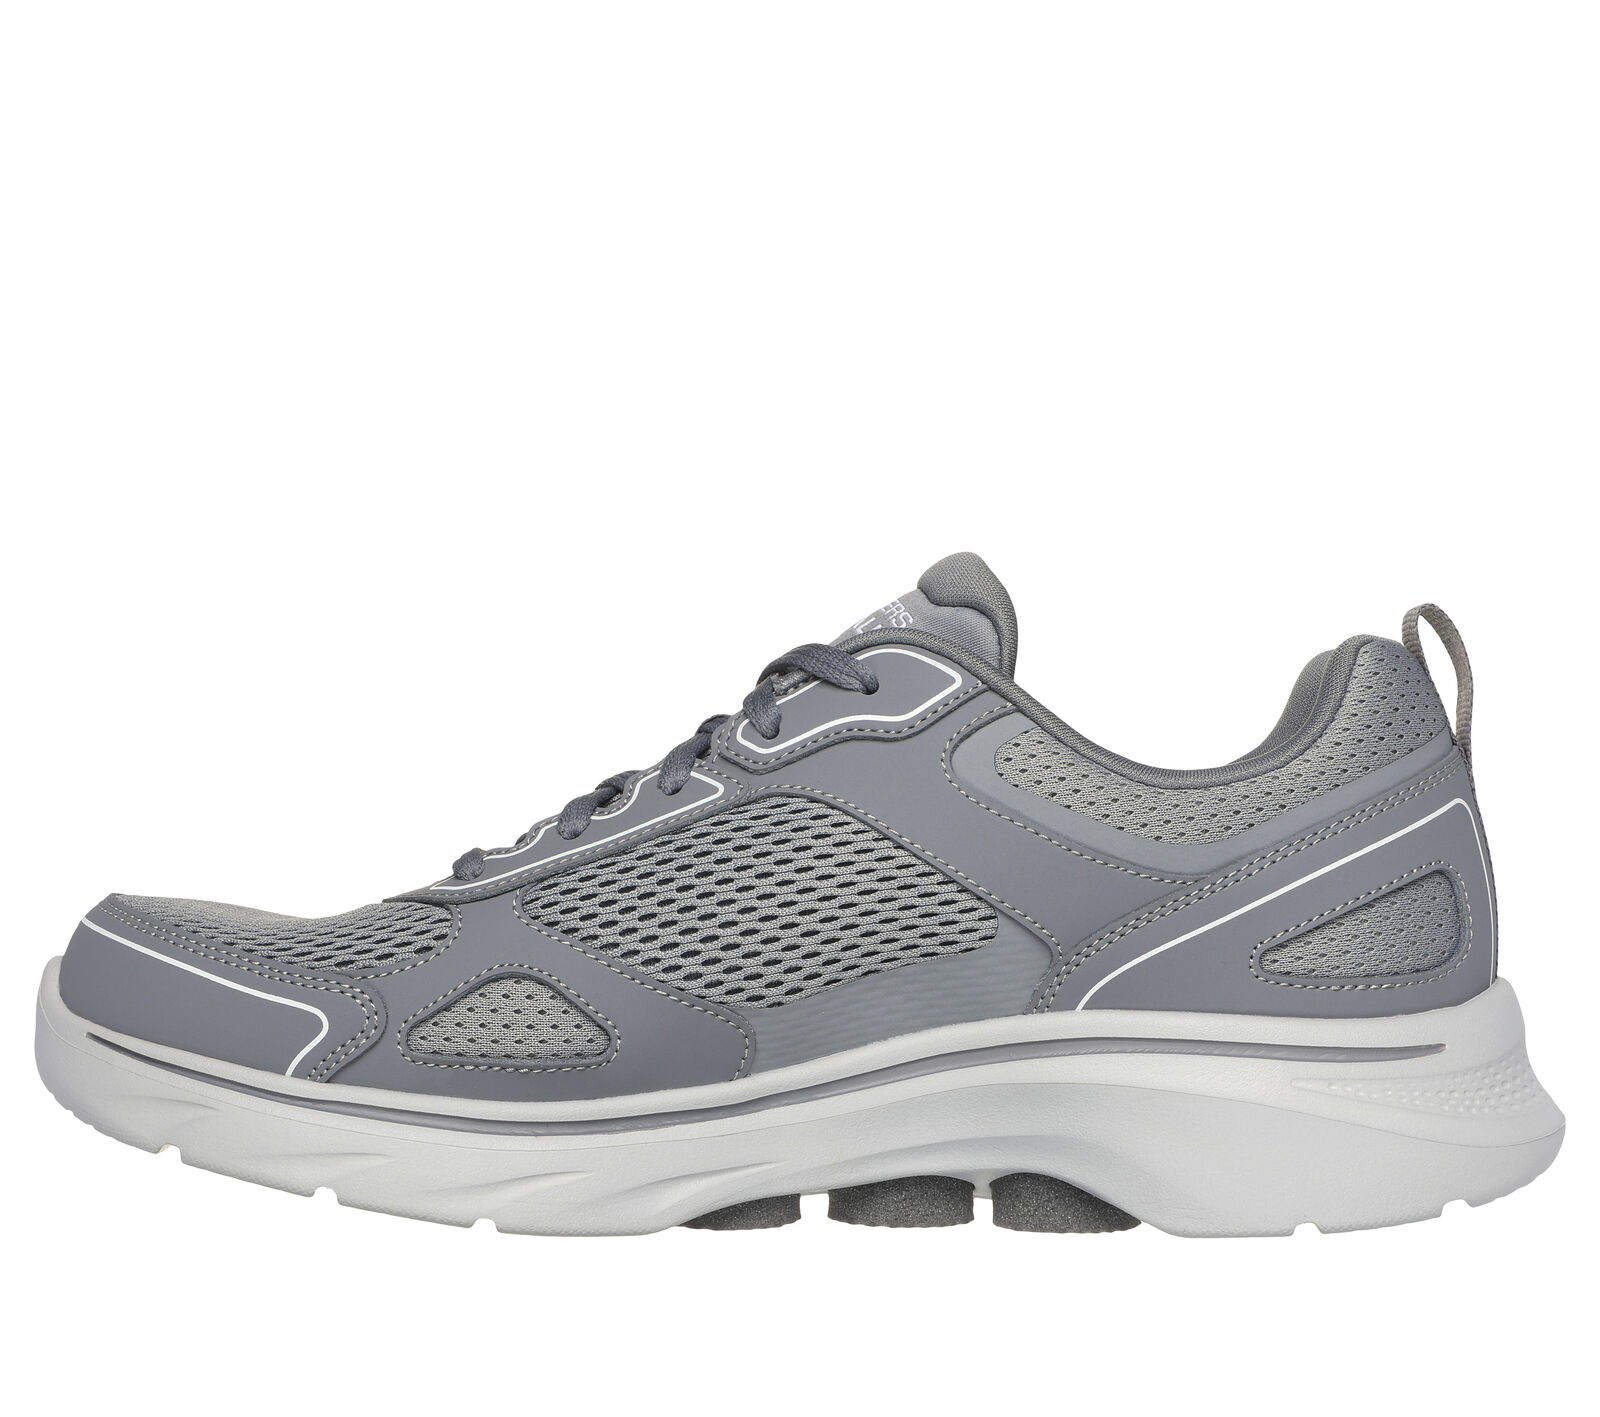 GO WALK 7 - The Forefather | SKECHERS